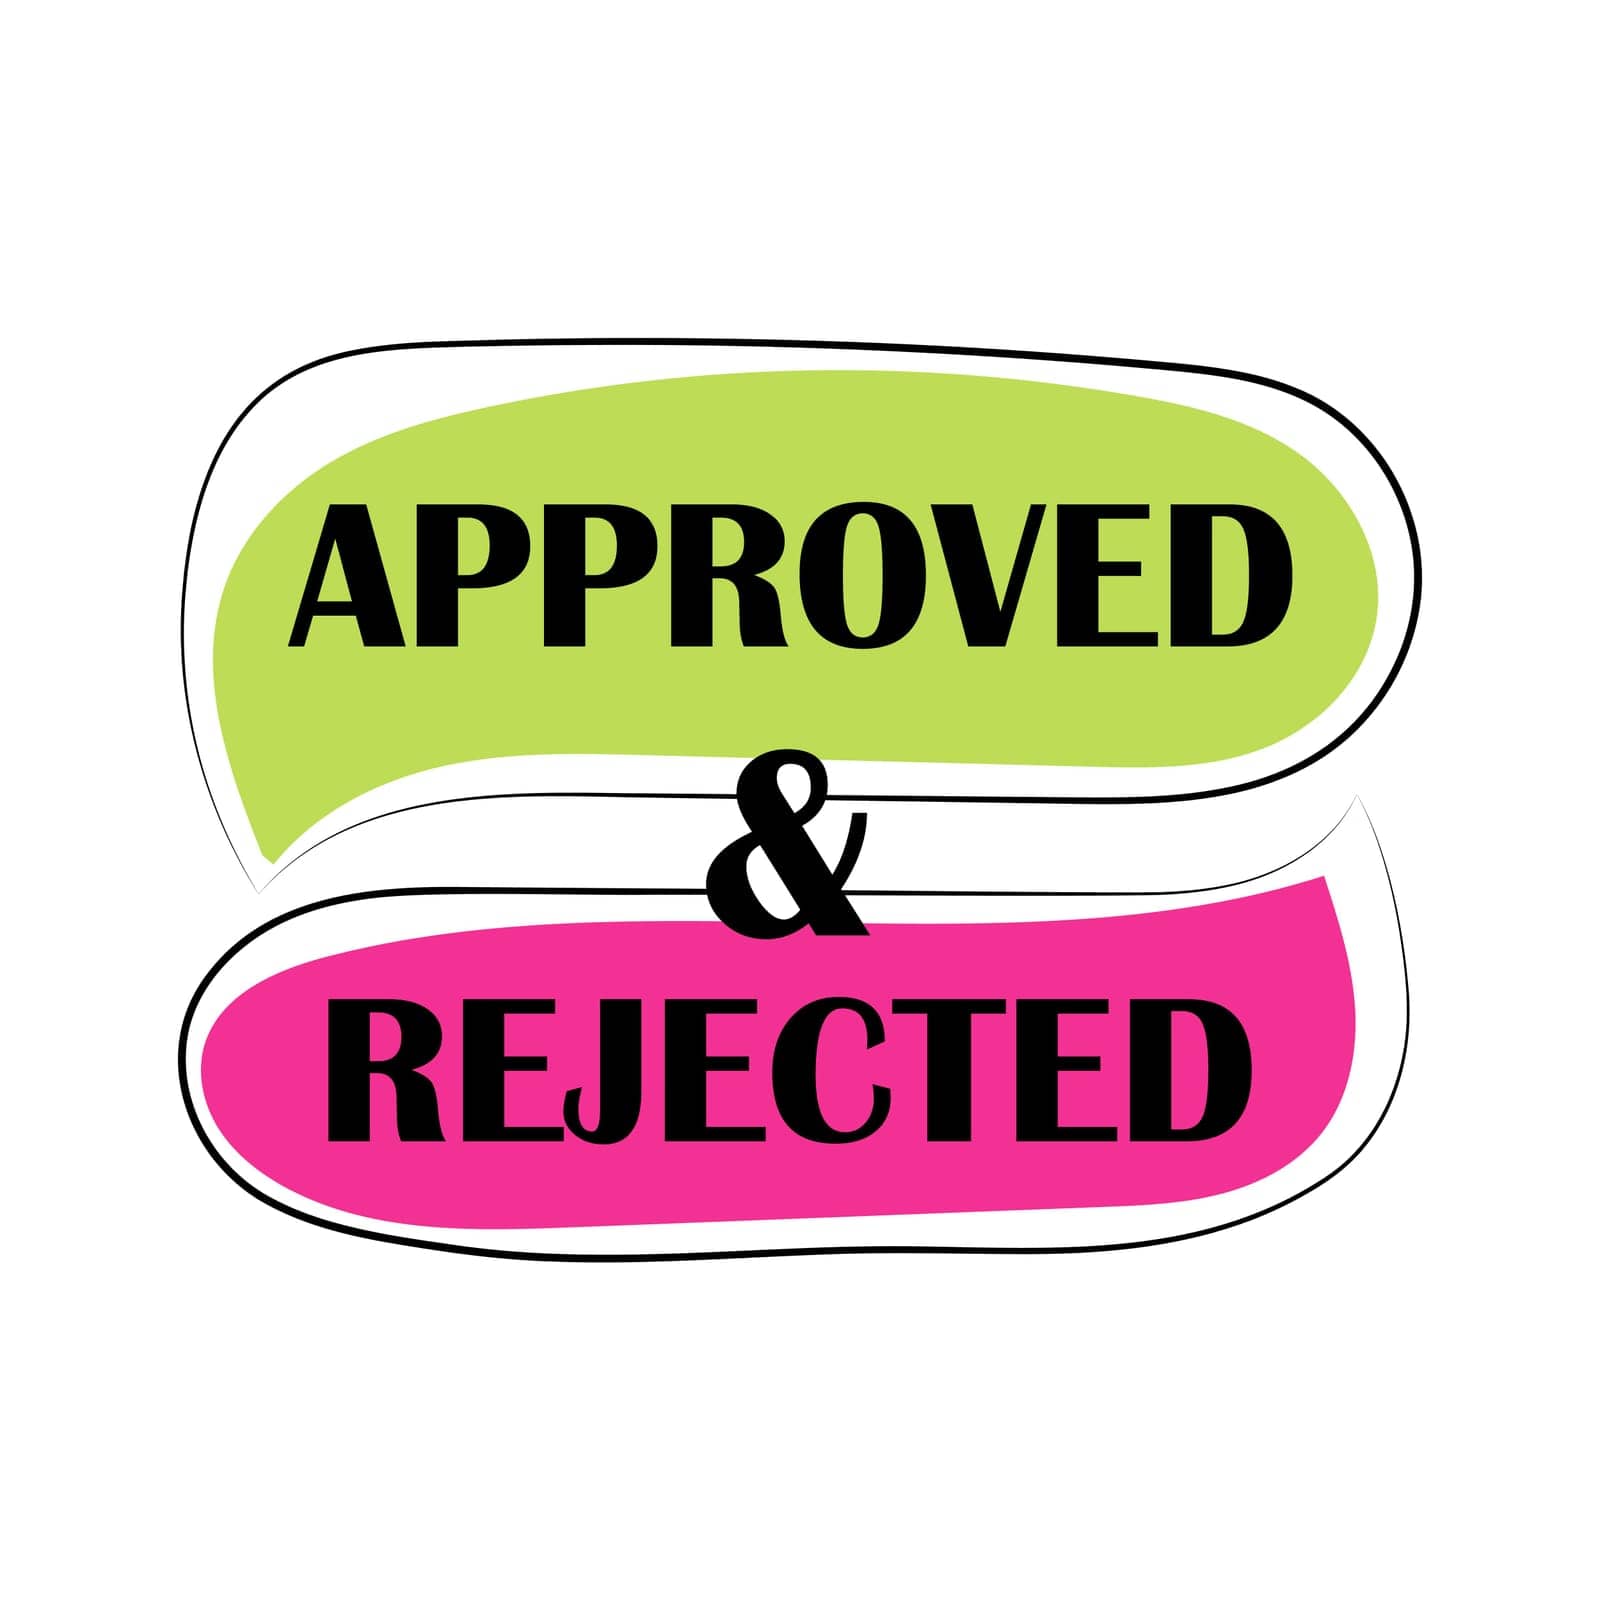 Choice approved or rejected. Quiz elements by MakeVector